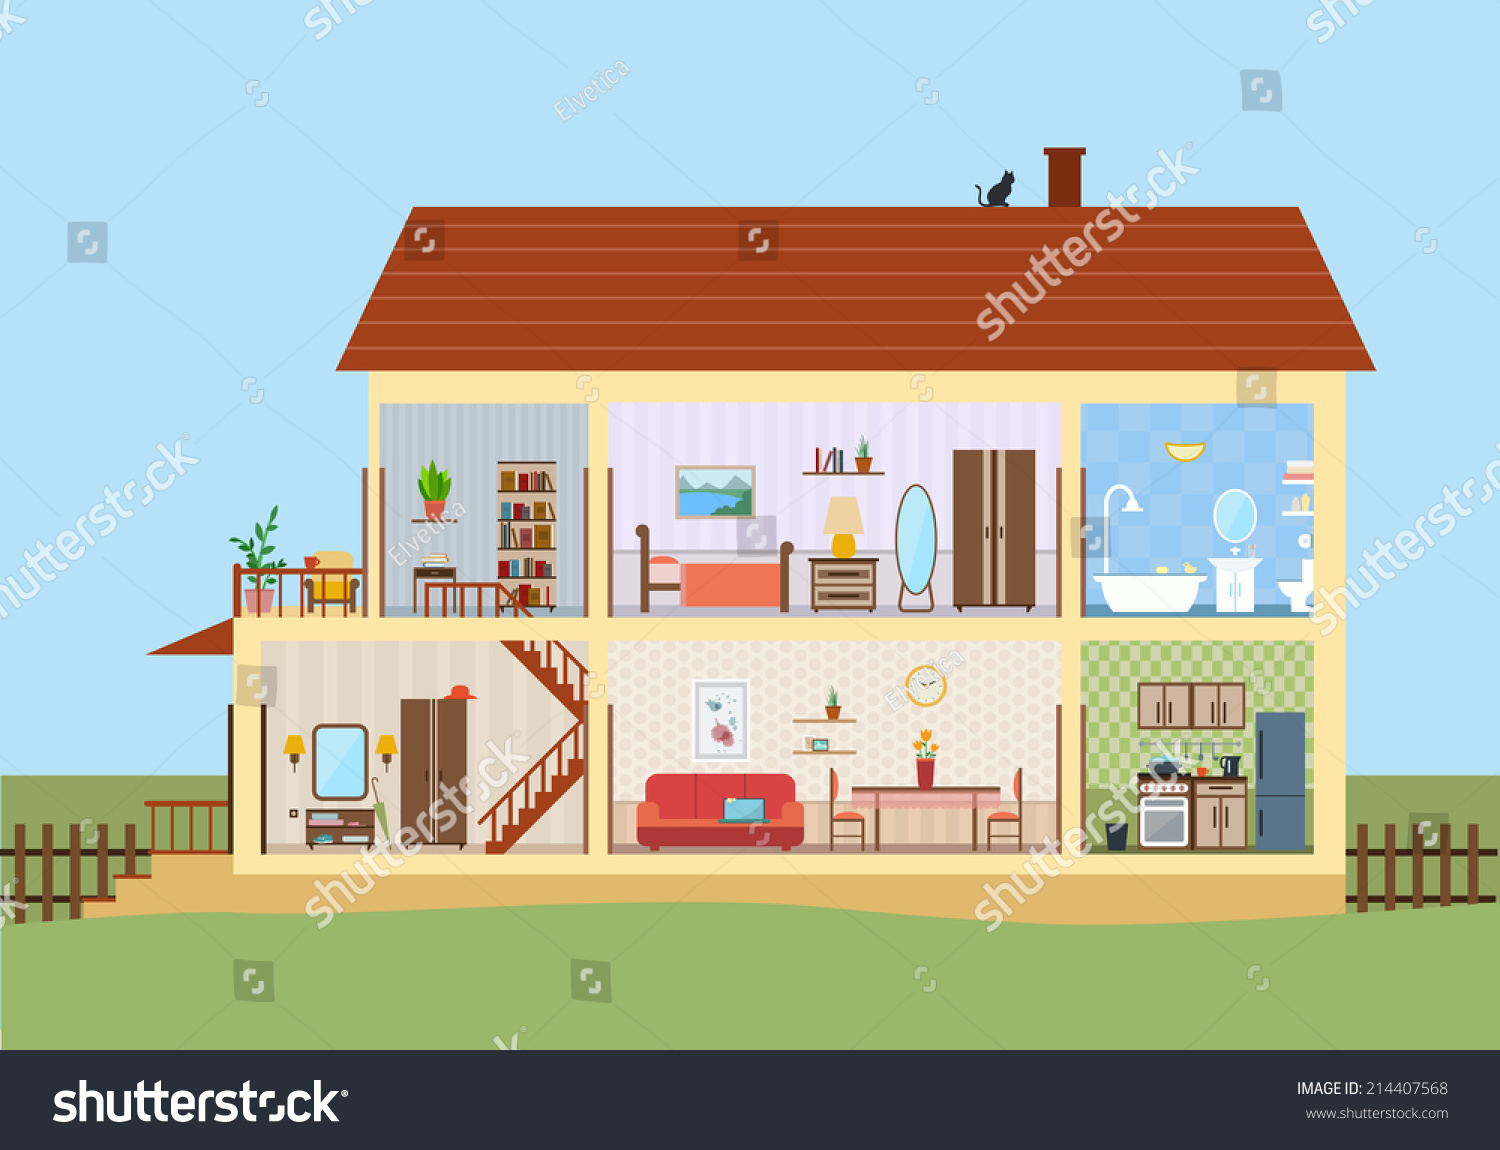 free clipart of rooms in house - photo #21